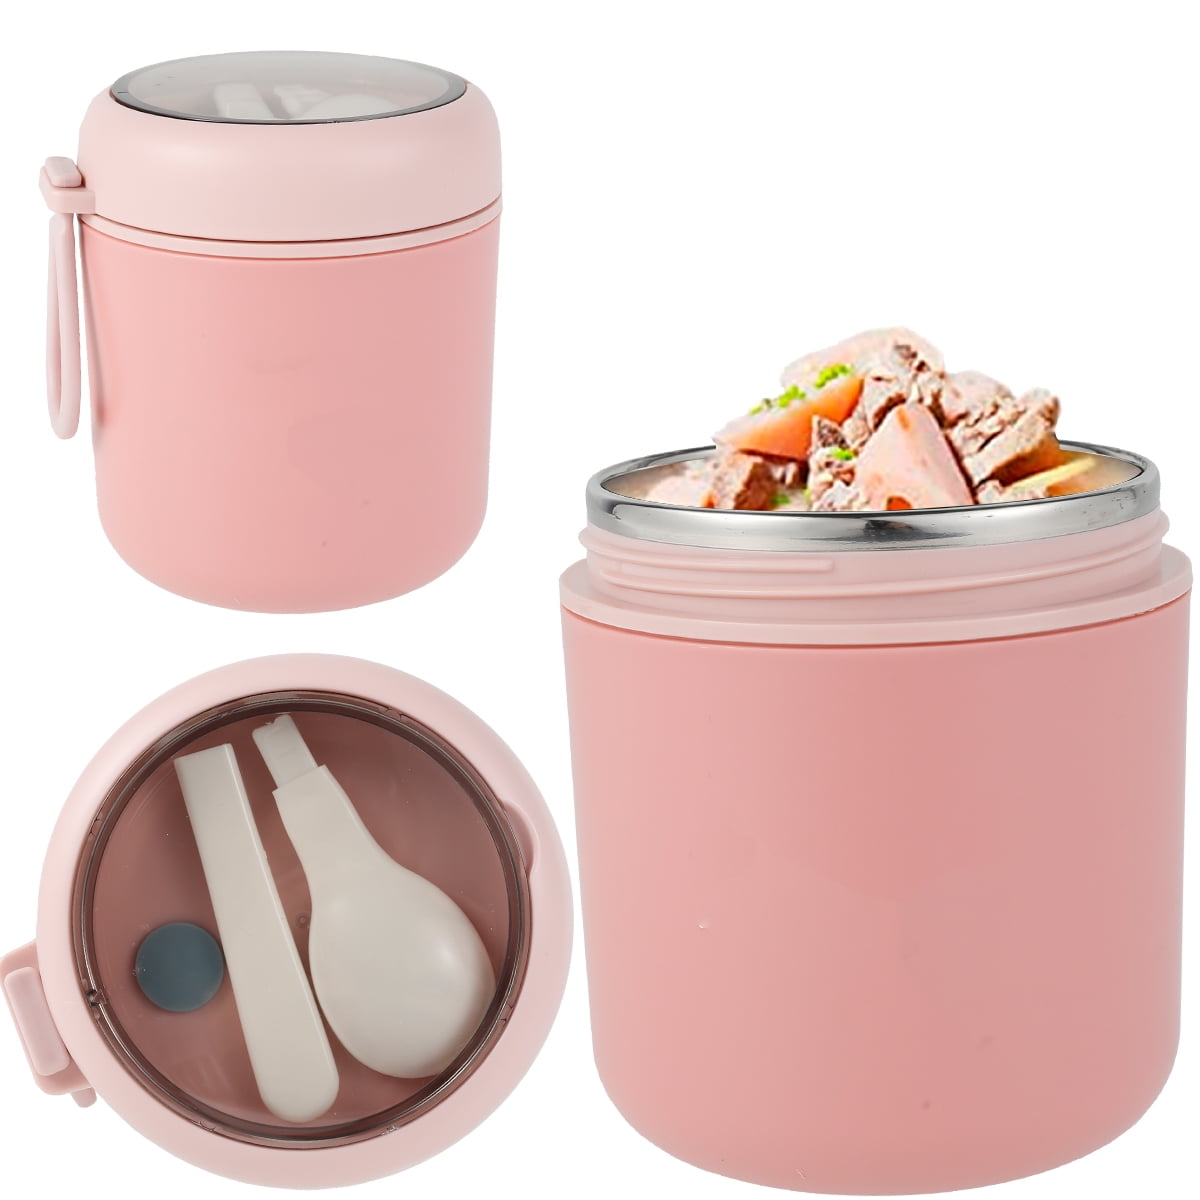 Buy 12 Hours Hot & Cold Insulated Flask + Soup Bowl + 2 Cups with Lids  (1F1SB2C) Online at Best Price in India on